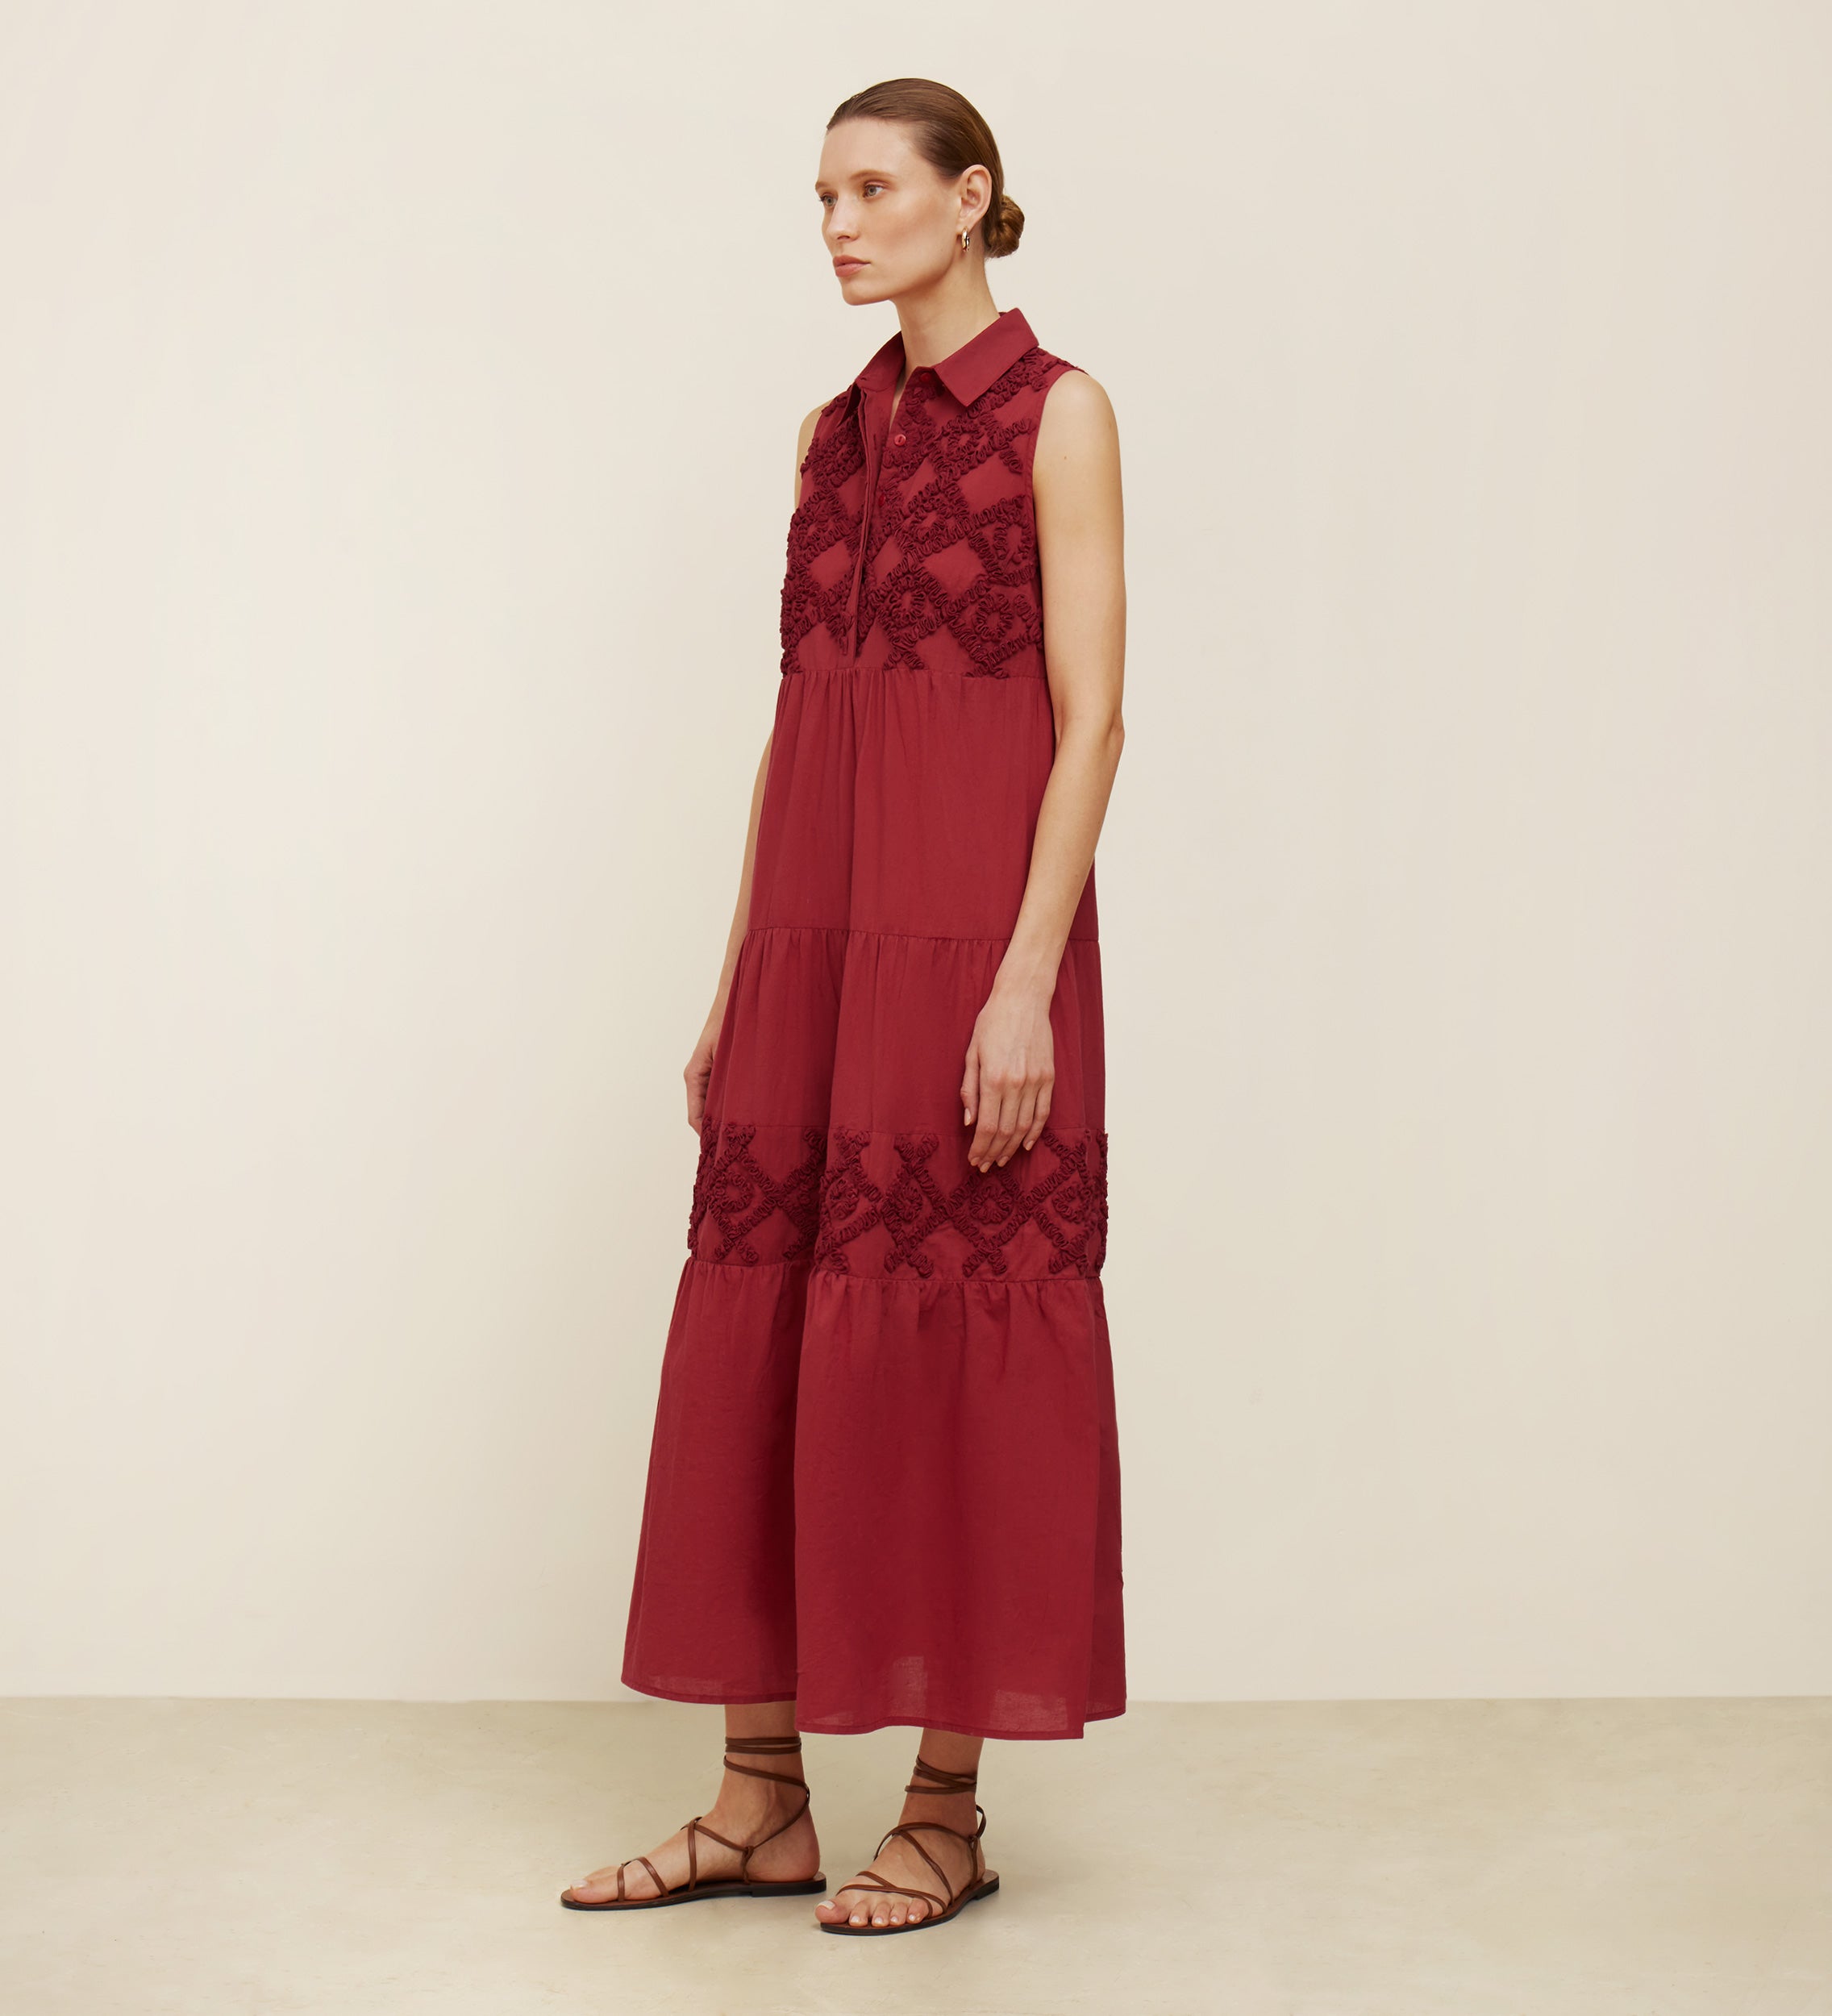 Embroidered dress with gathered floors